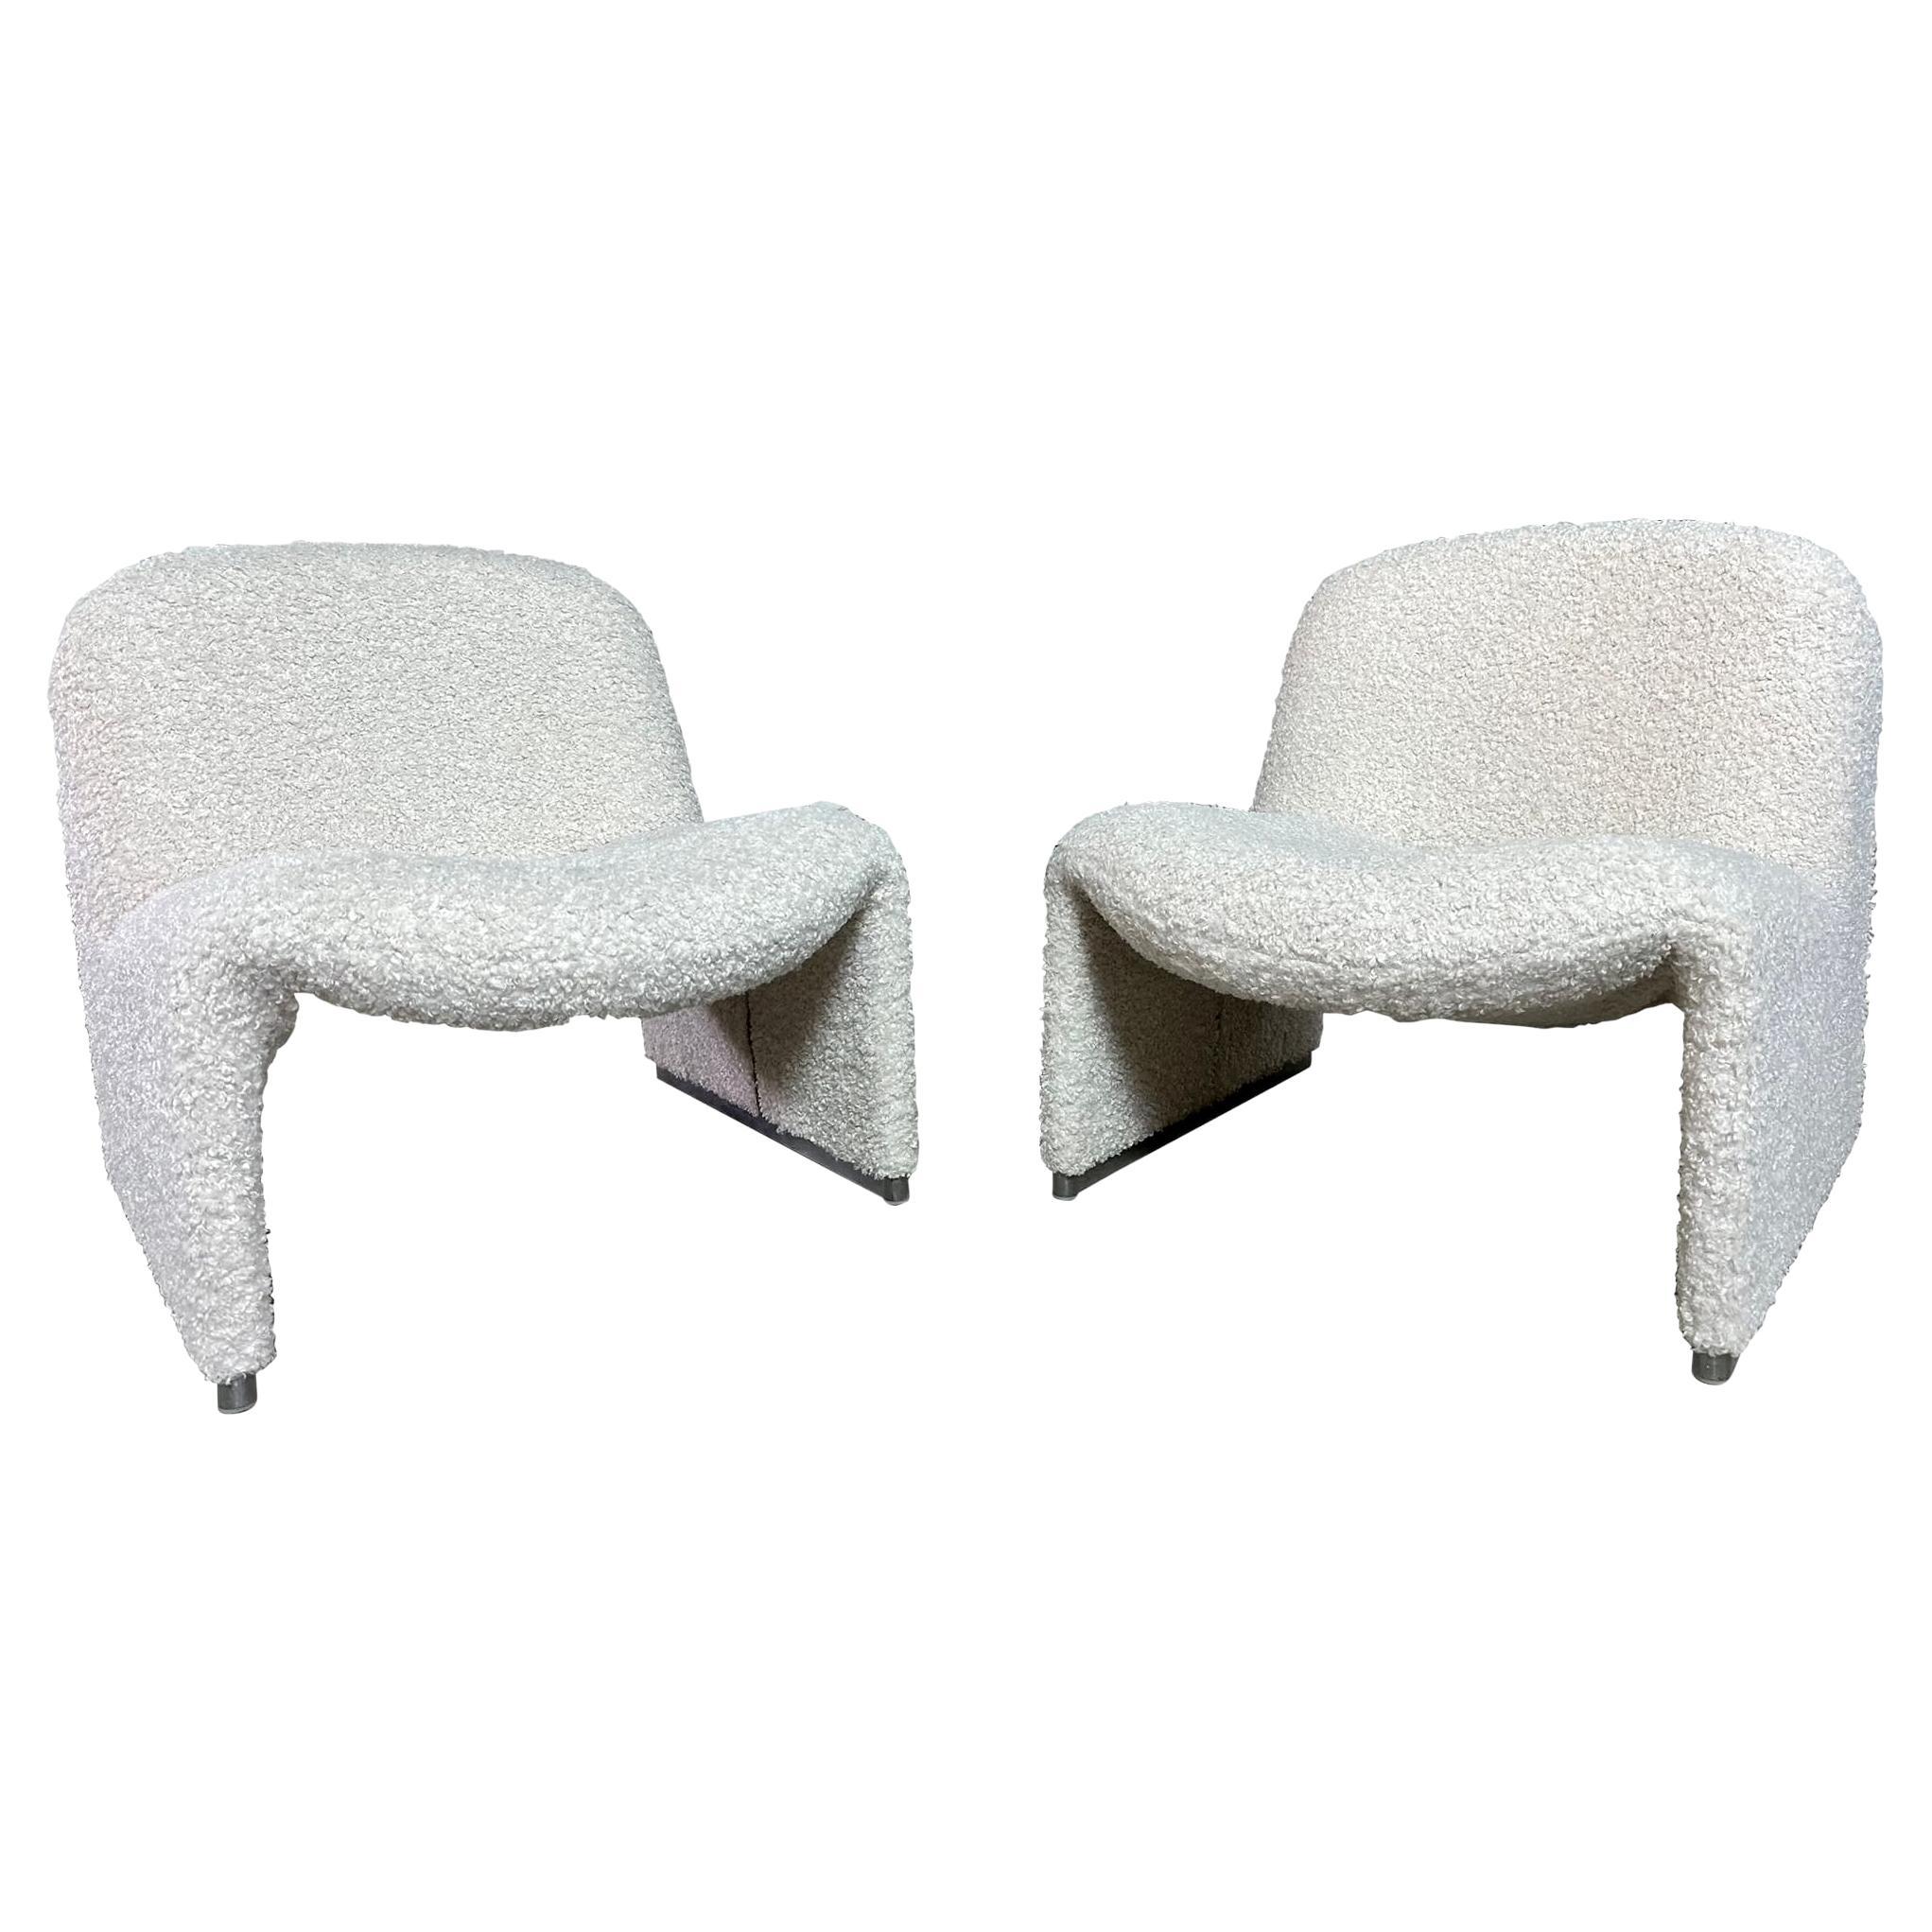 Pair of Alky Chairs by Giancarlo Piretti for Castelli, Italy